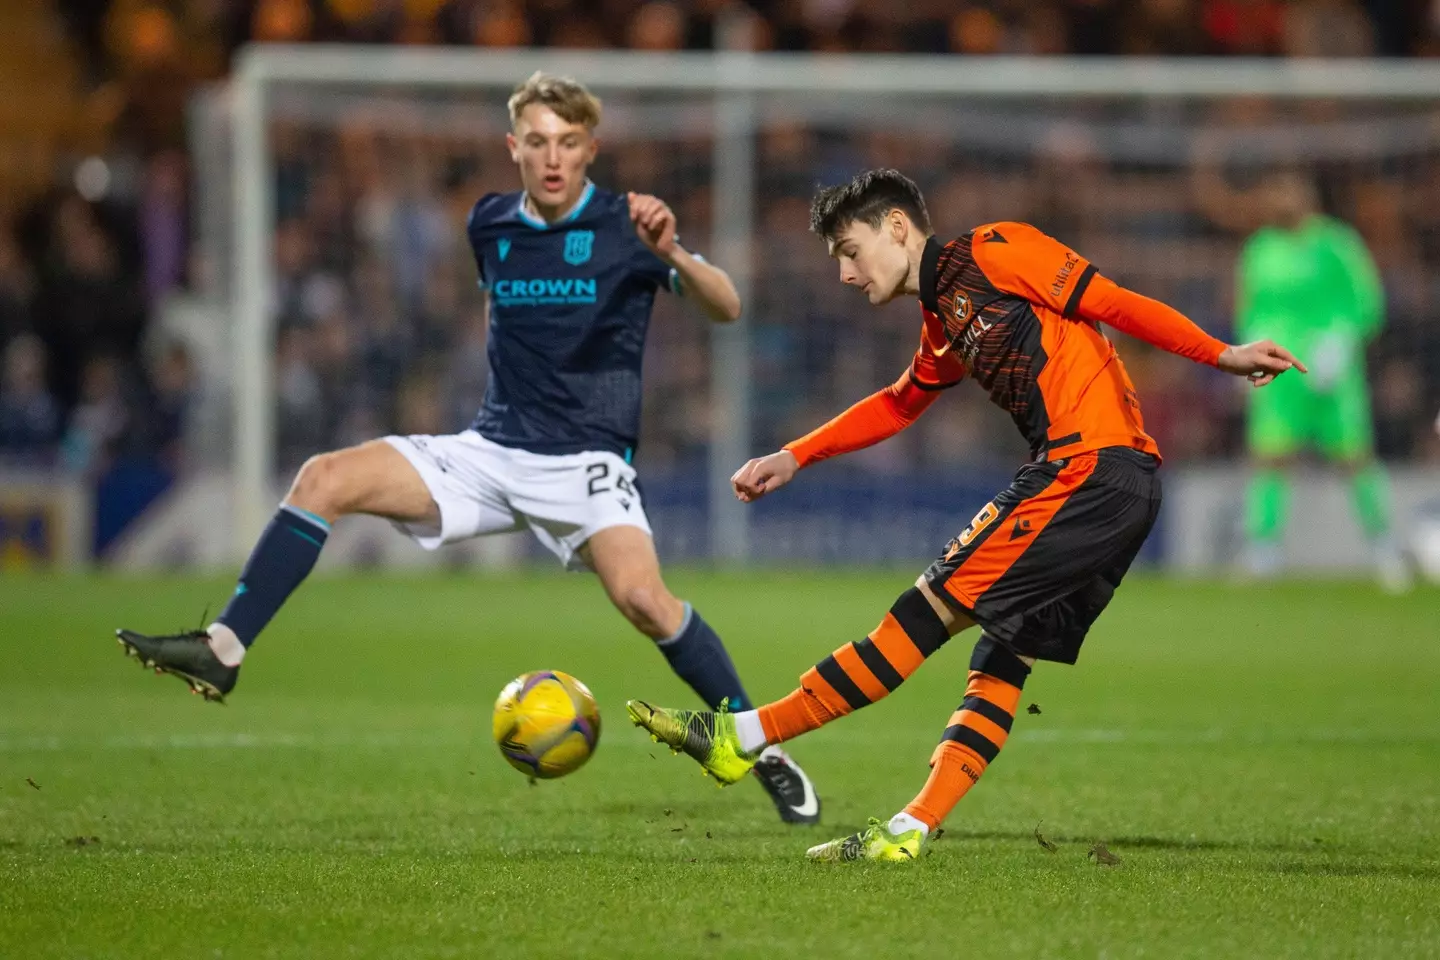 Wagonback accurately predicted the Dundee derby would end in a draw (Image: Alamy)